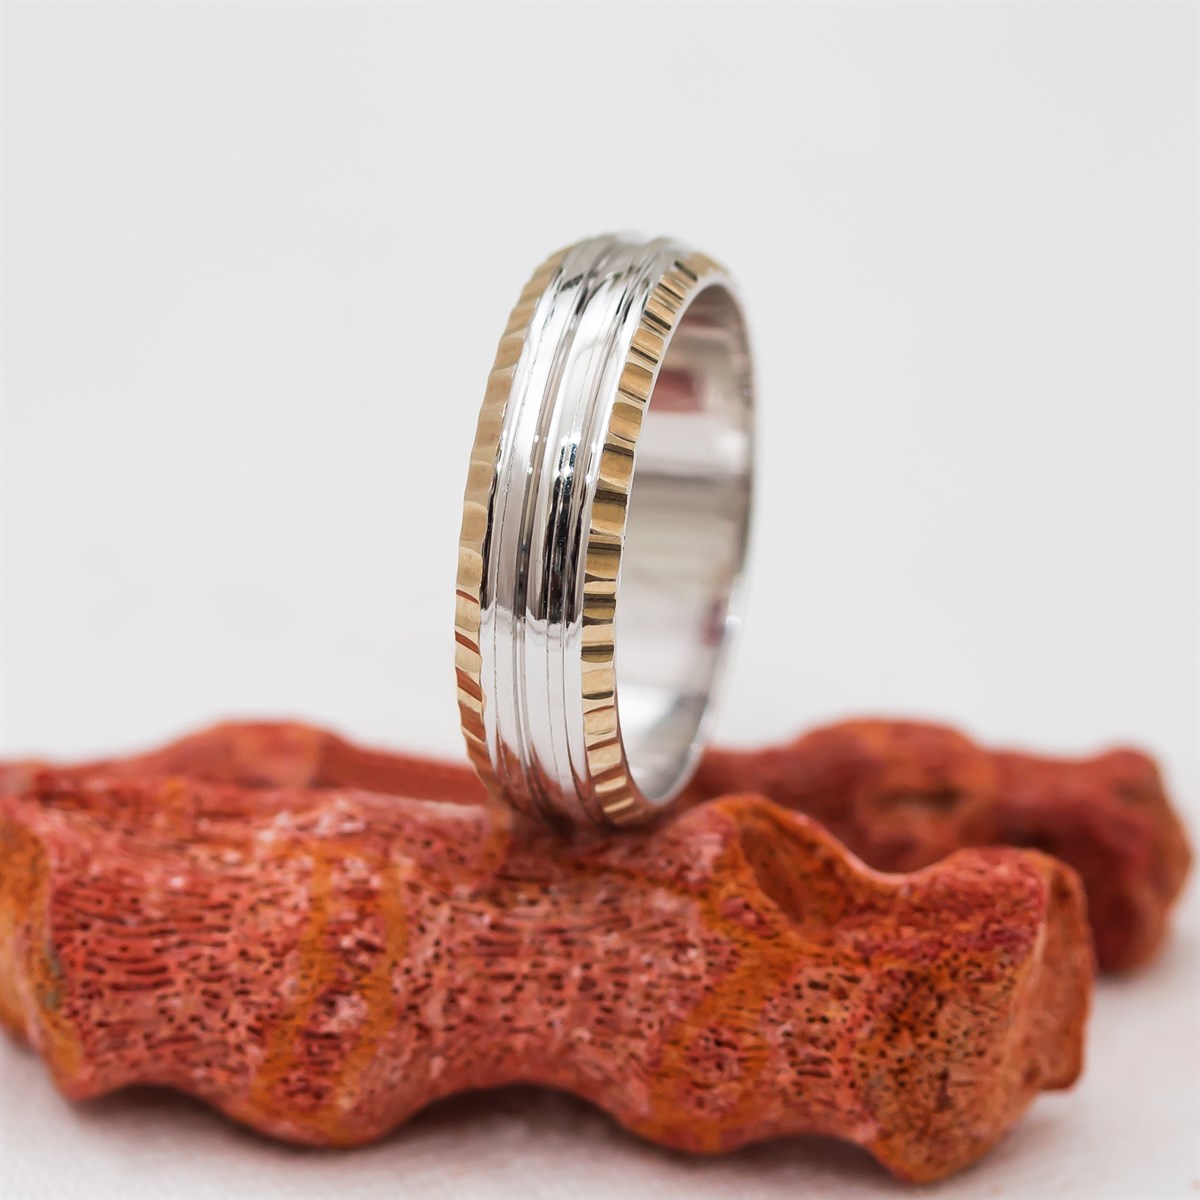 Unisex Silver Wedding Ring with Patterned Edges and Gold Color Stripe